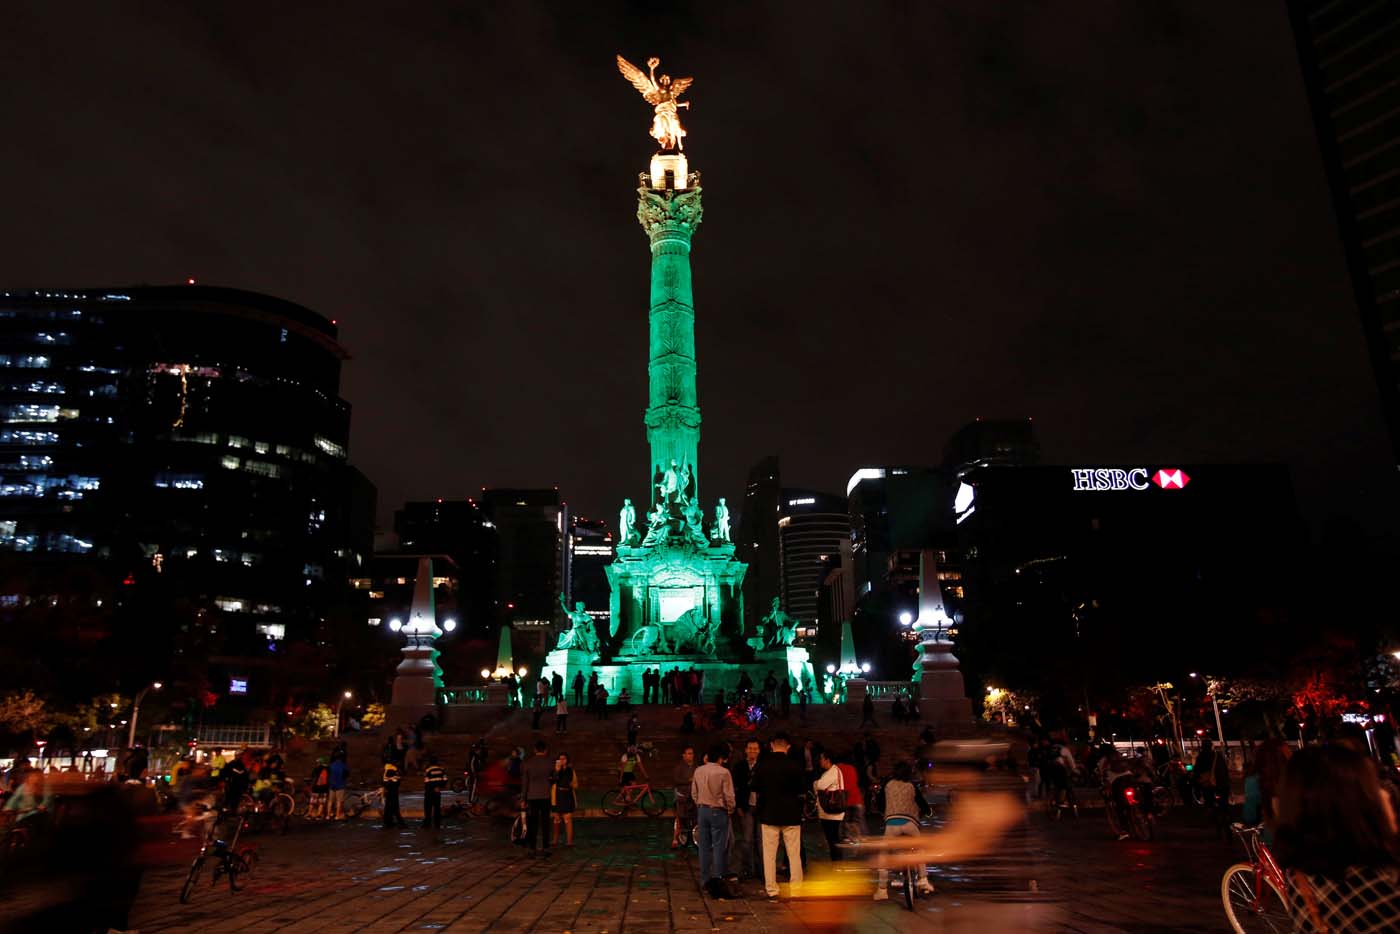 People stand by "Angel de la Independencia" monument before the lights were turned off for Earth Hour in Mexico City, Mexico, March 25, 2017. REUTERS/Ginnette Riquelme